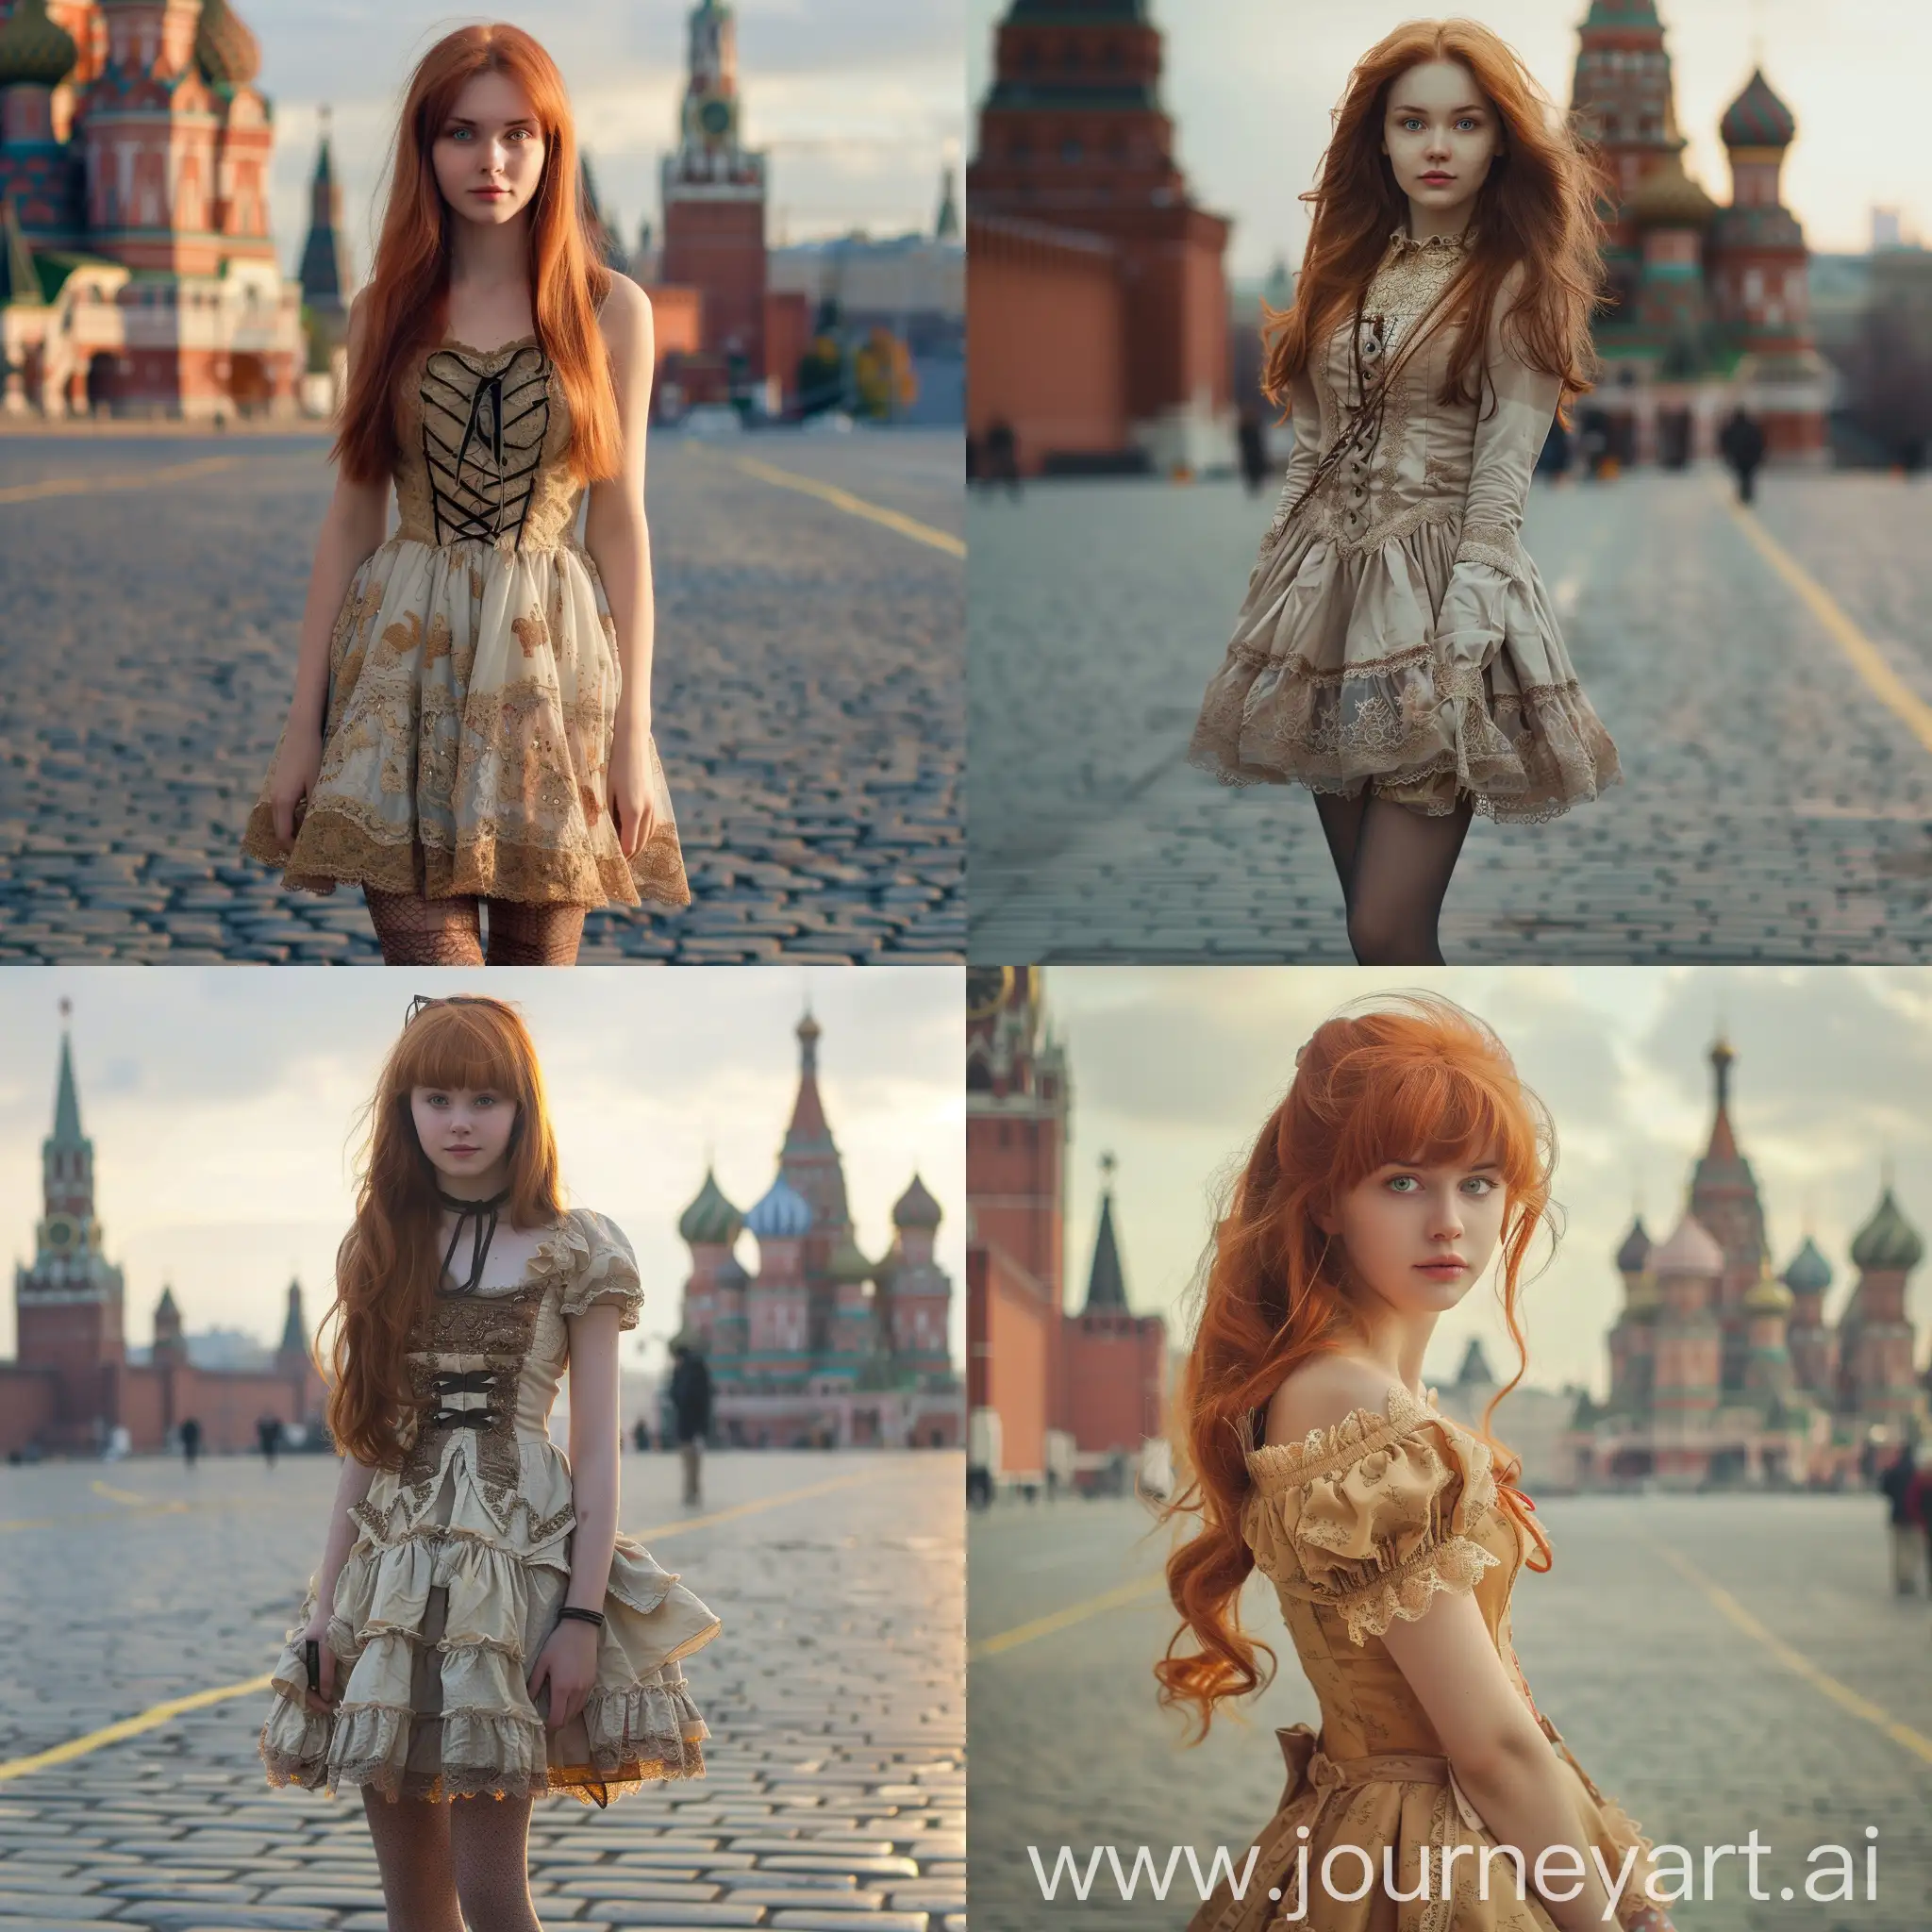 RedHaired-Russian-Girl-in-Elegant-Dress-on-Red-Square-at-Dawn